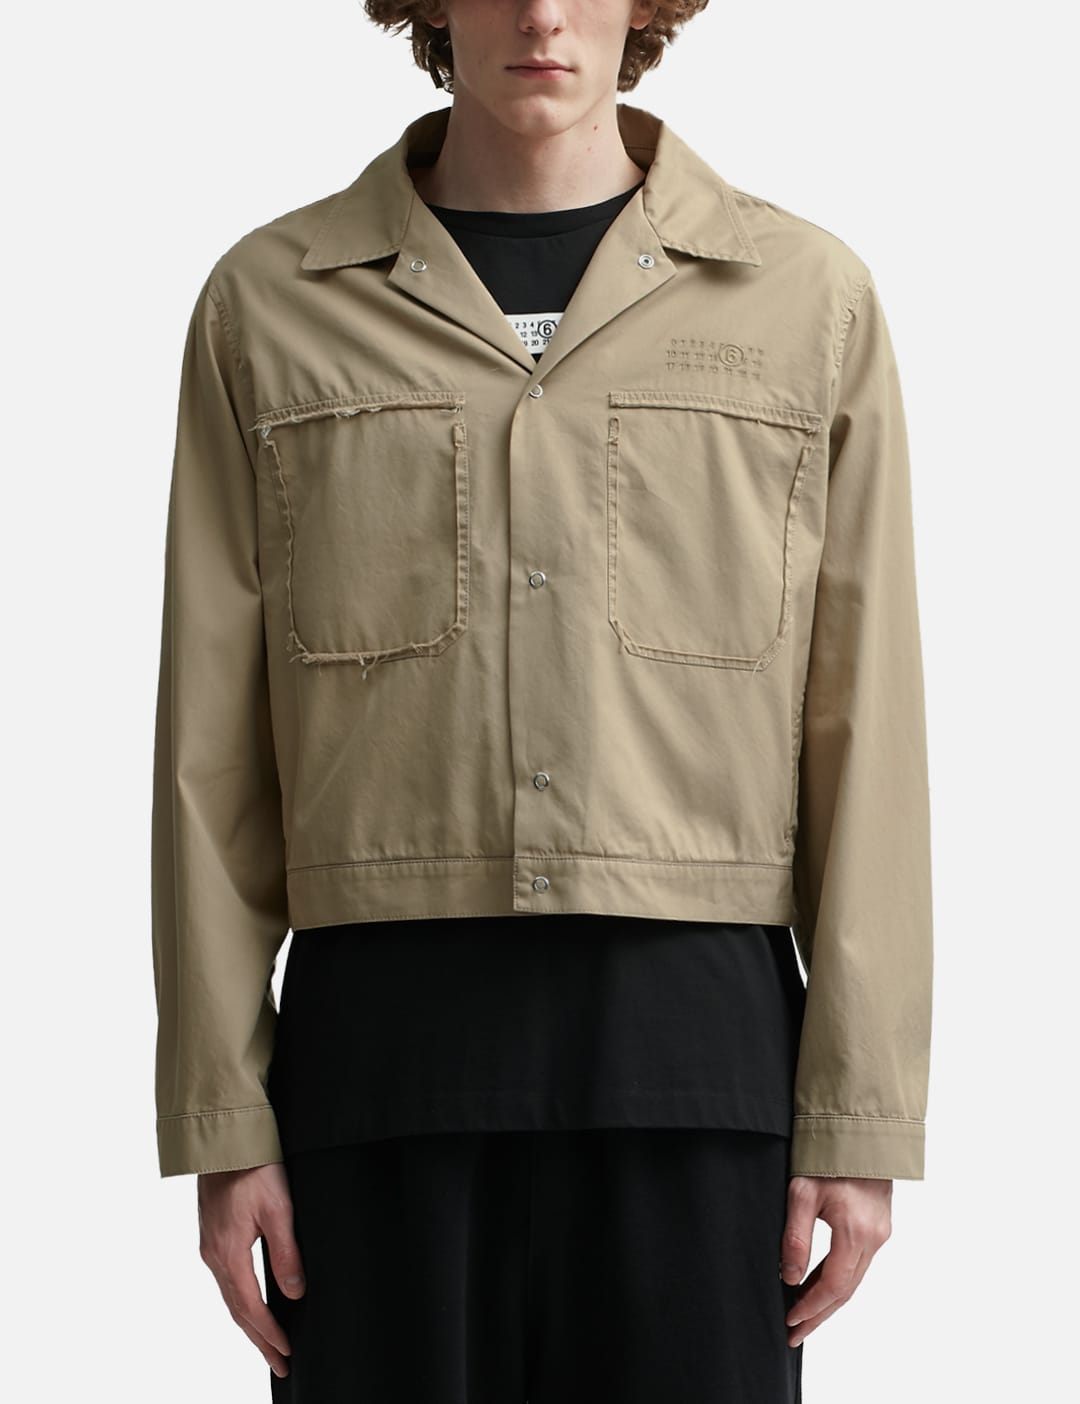 MM6 Maison Margiela - Raw Cut-Out Jacket | HBX - Globally Curated